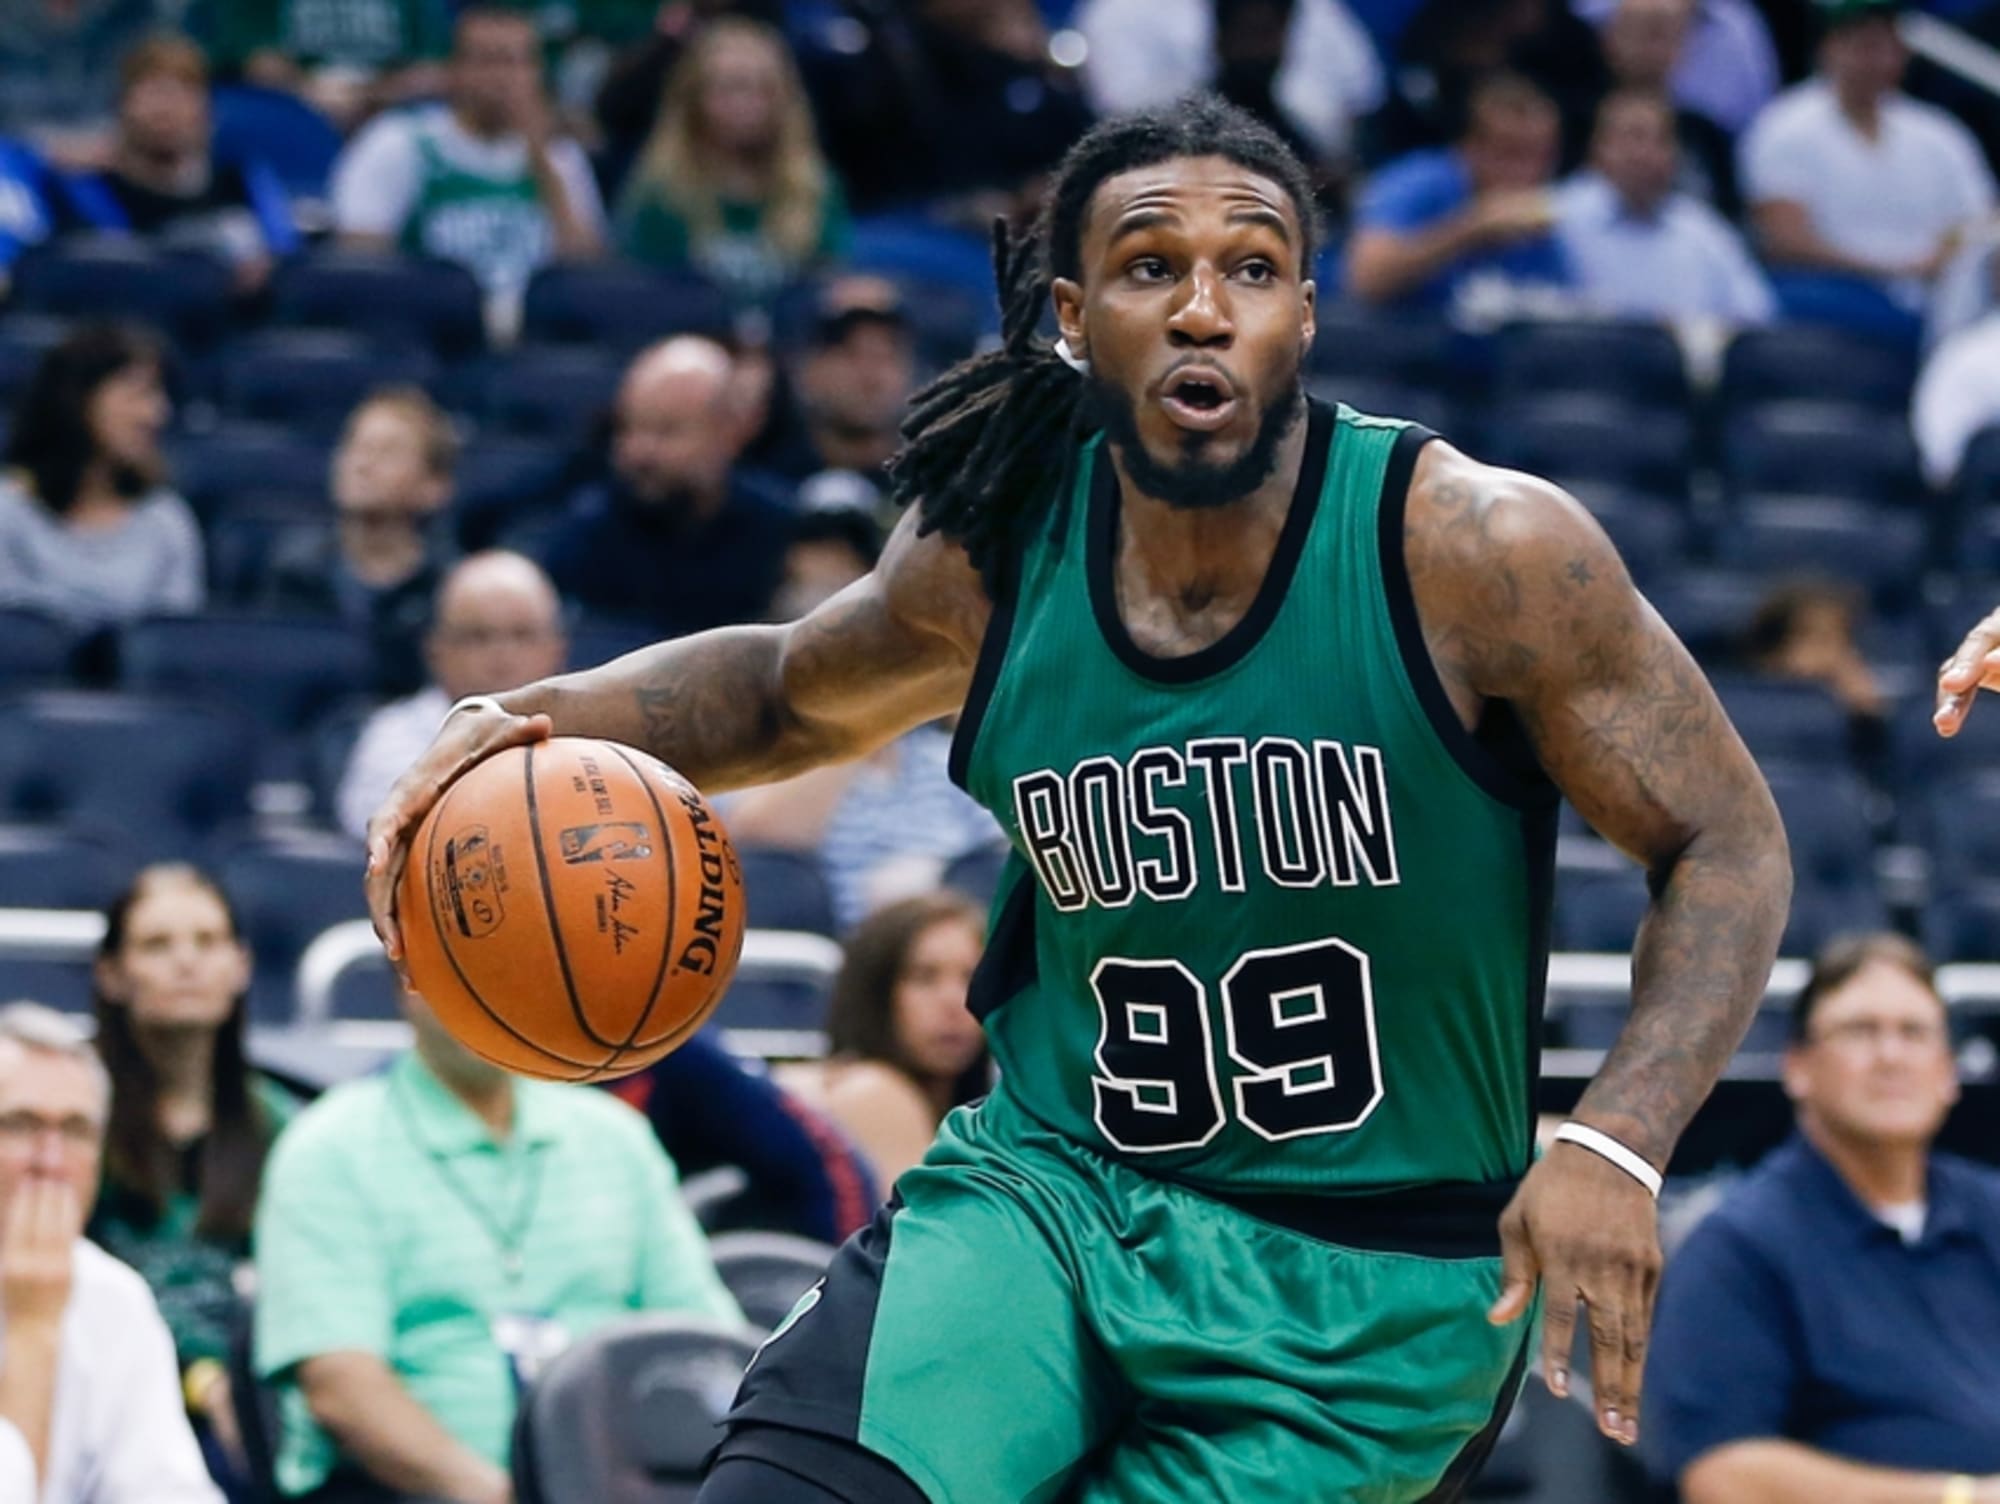 Celtics' Jae Crowder wants an apology from Cavs' J.R. Smith after